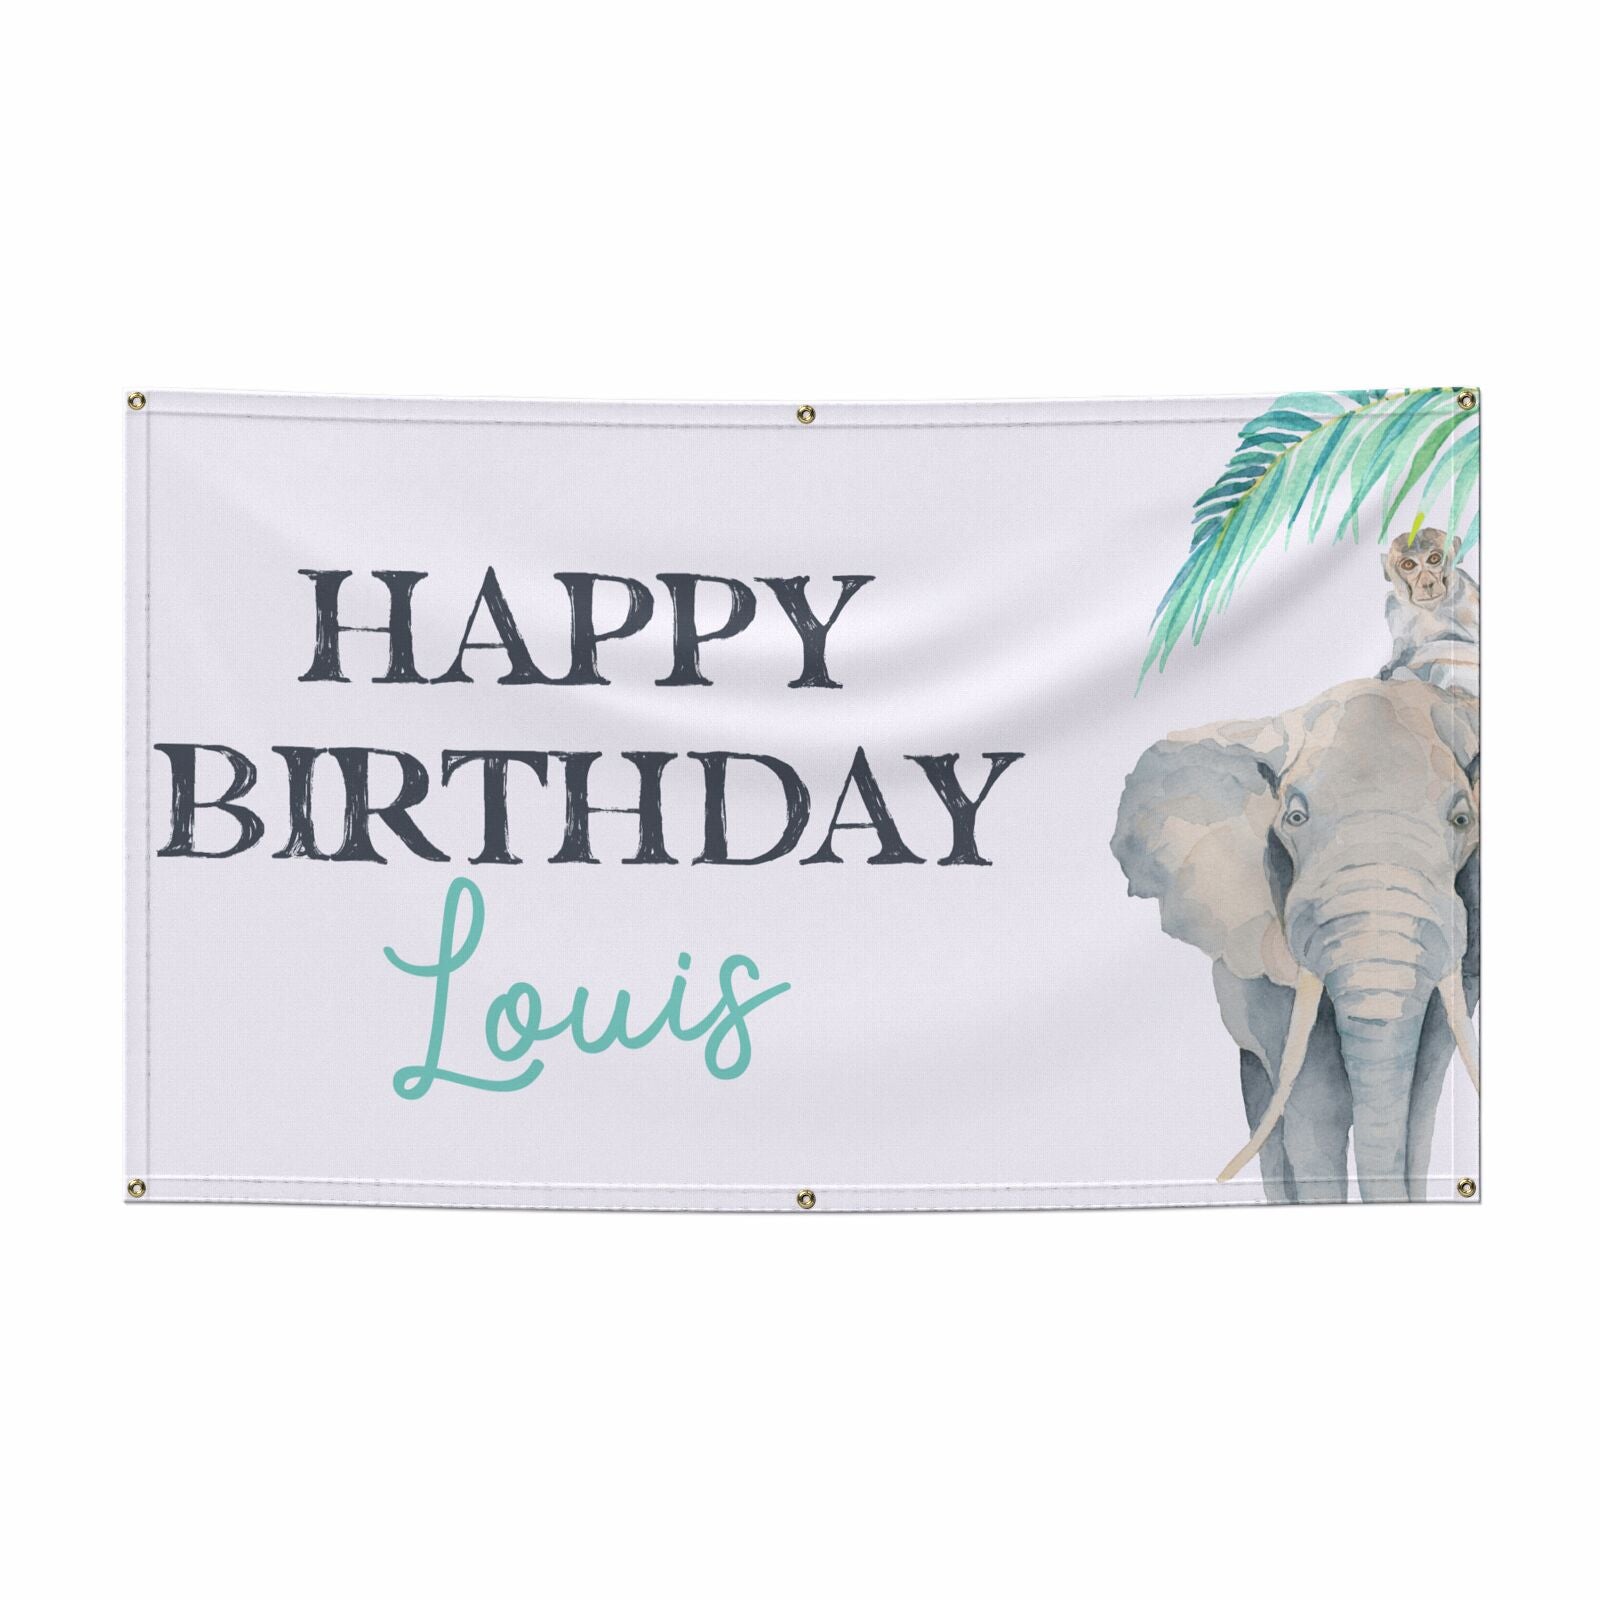 Personalised Kids Birthday 5x3 Vinly Banner with Grommets